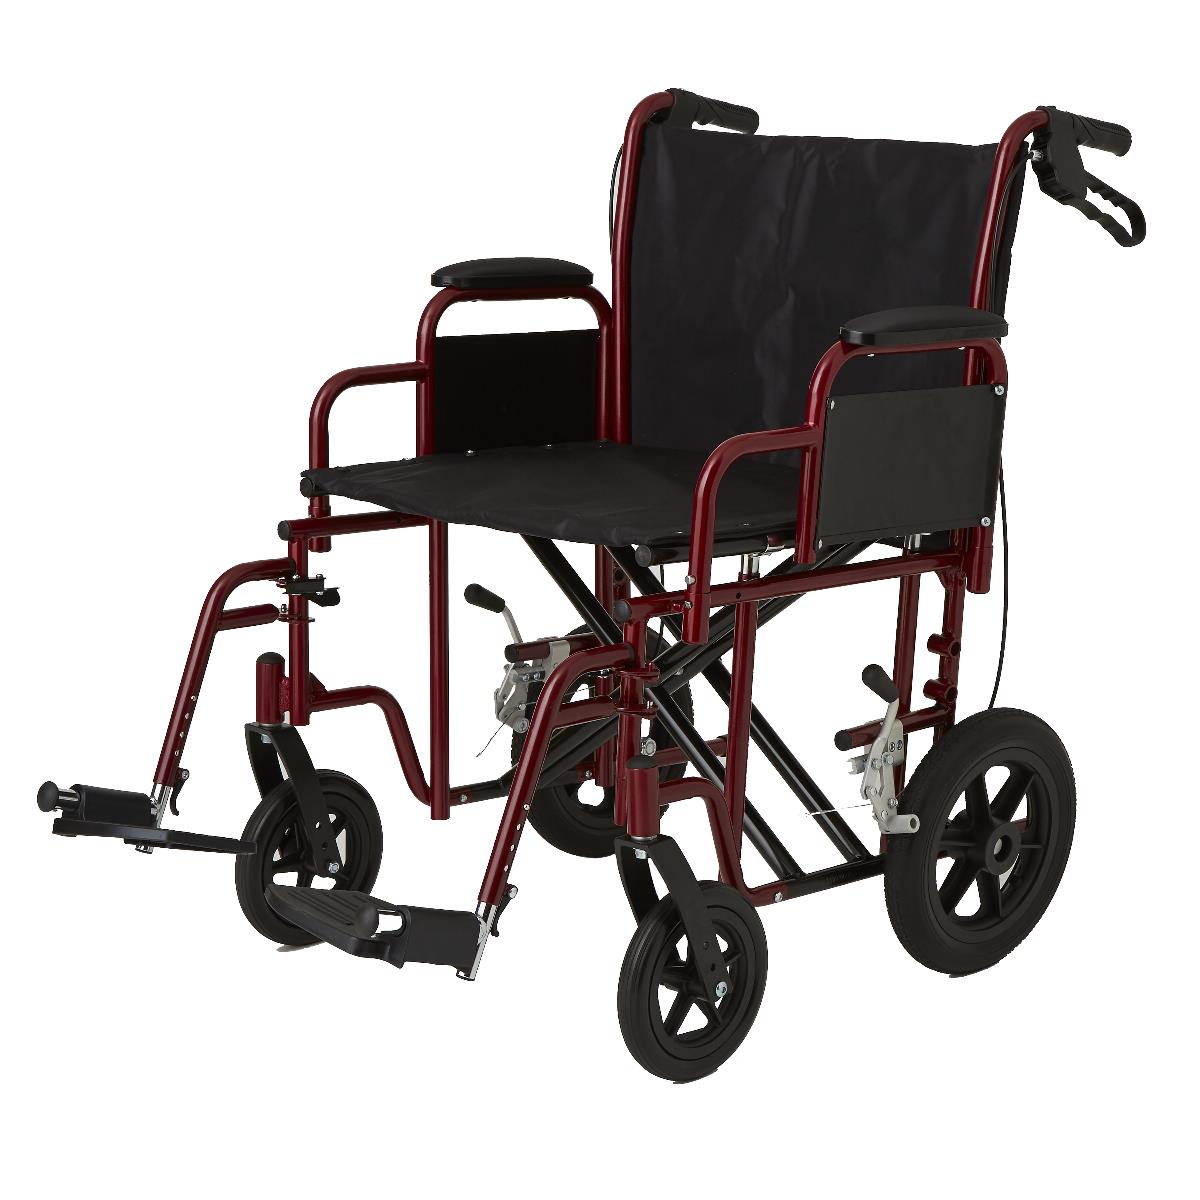 Medline 22" Wide Bariatric Transport Chair, Red MDS80822B